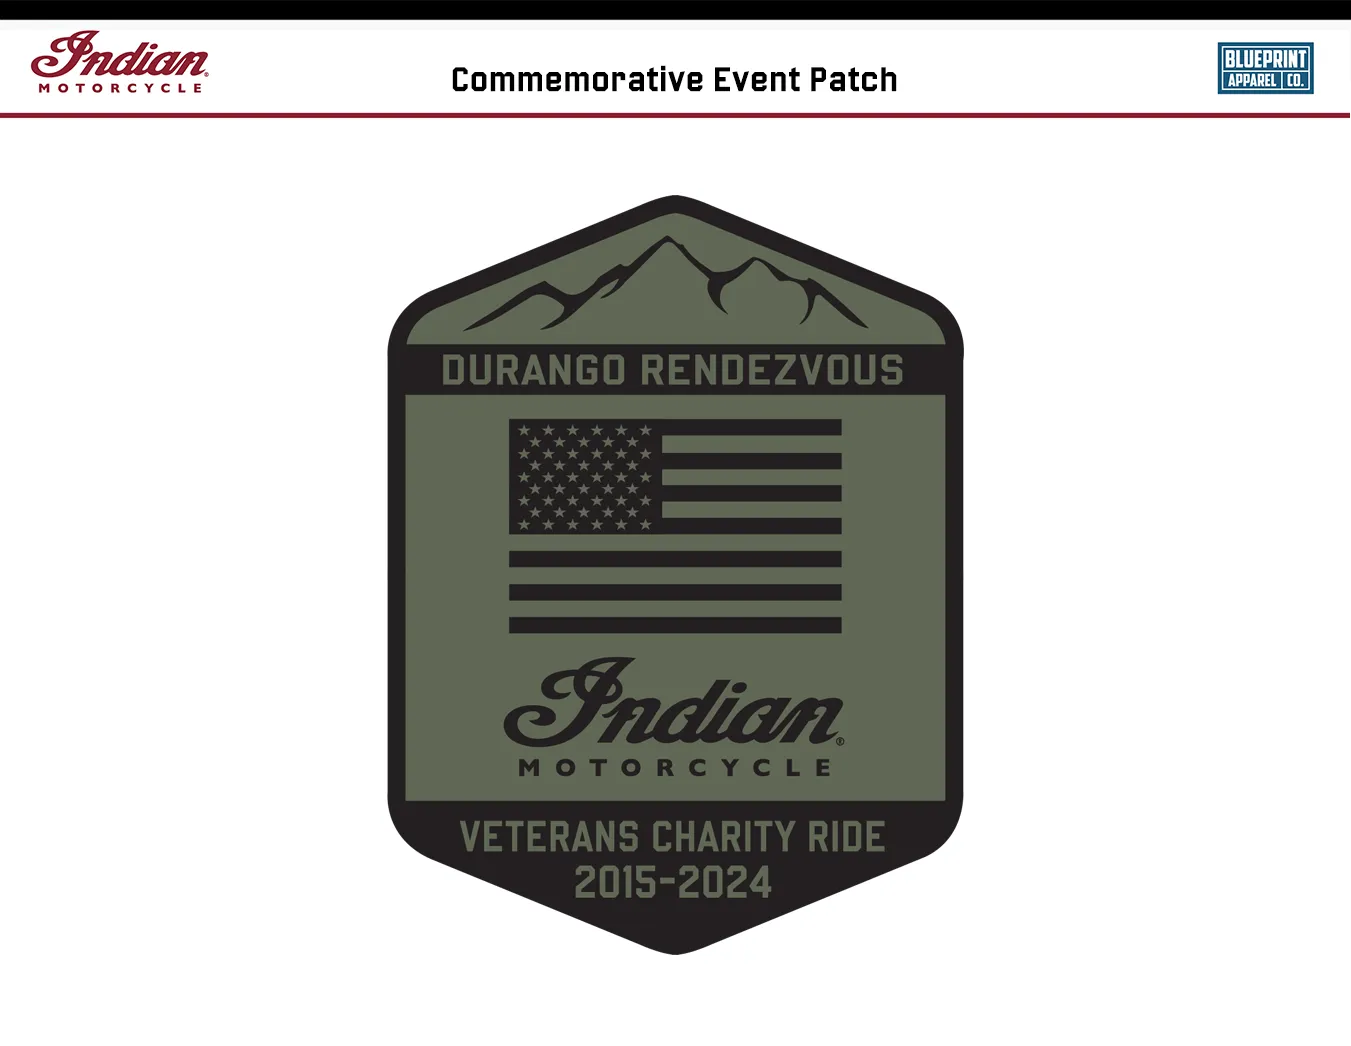 Veterans Charity Ride 10th Anniversary Patch 2015-2024